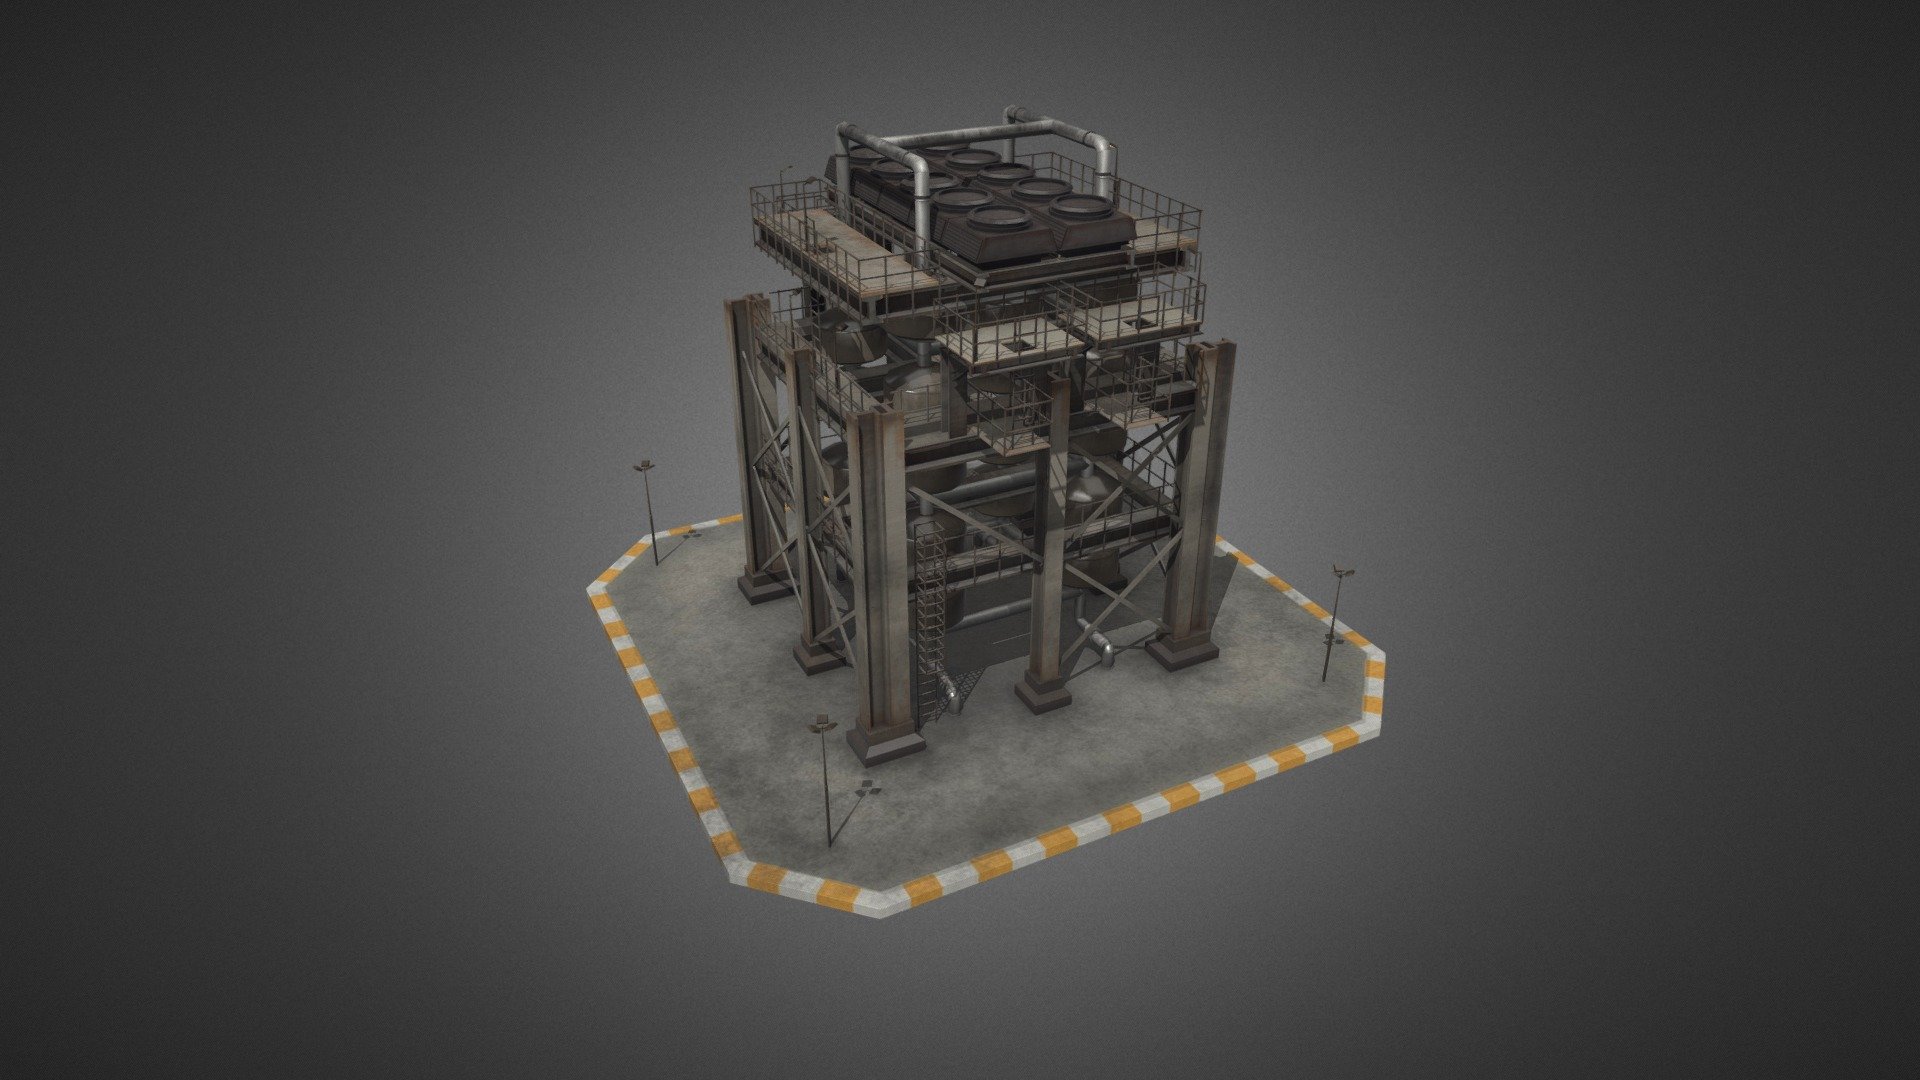 Low poly game-ready 3d model of an Oil Refinery 09 for Virtual Reality (VR), Augmented Reality (AR), games and other real-time apps 3d model